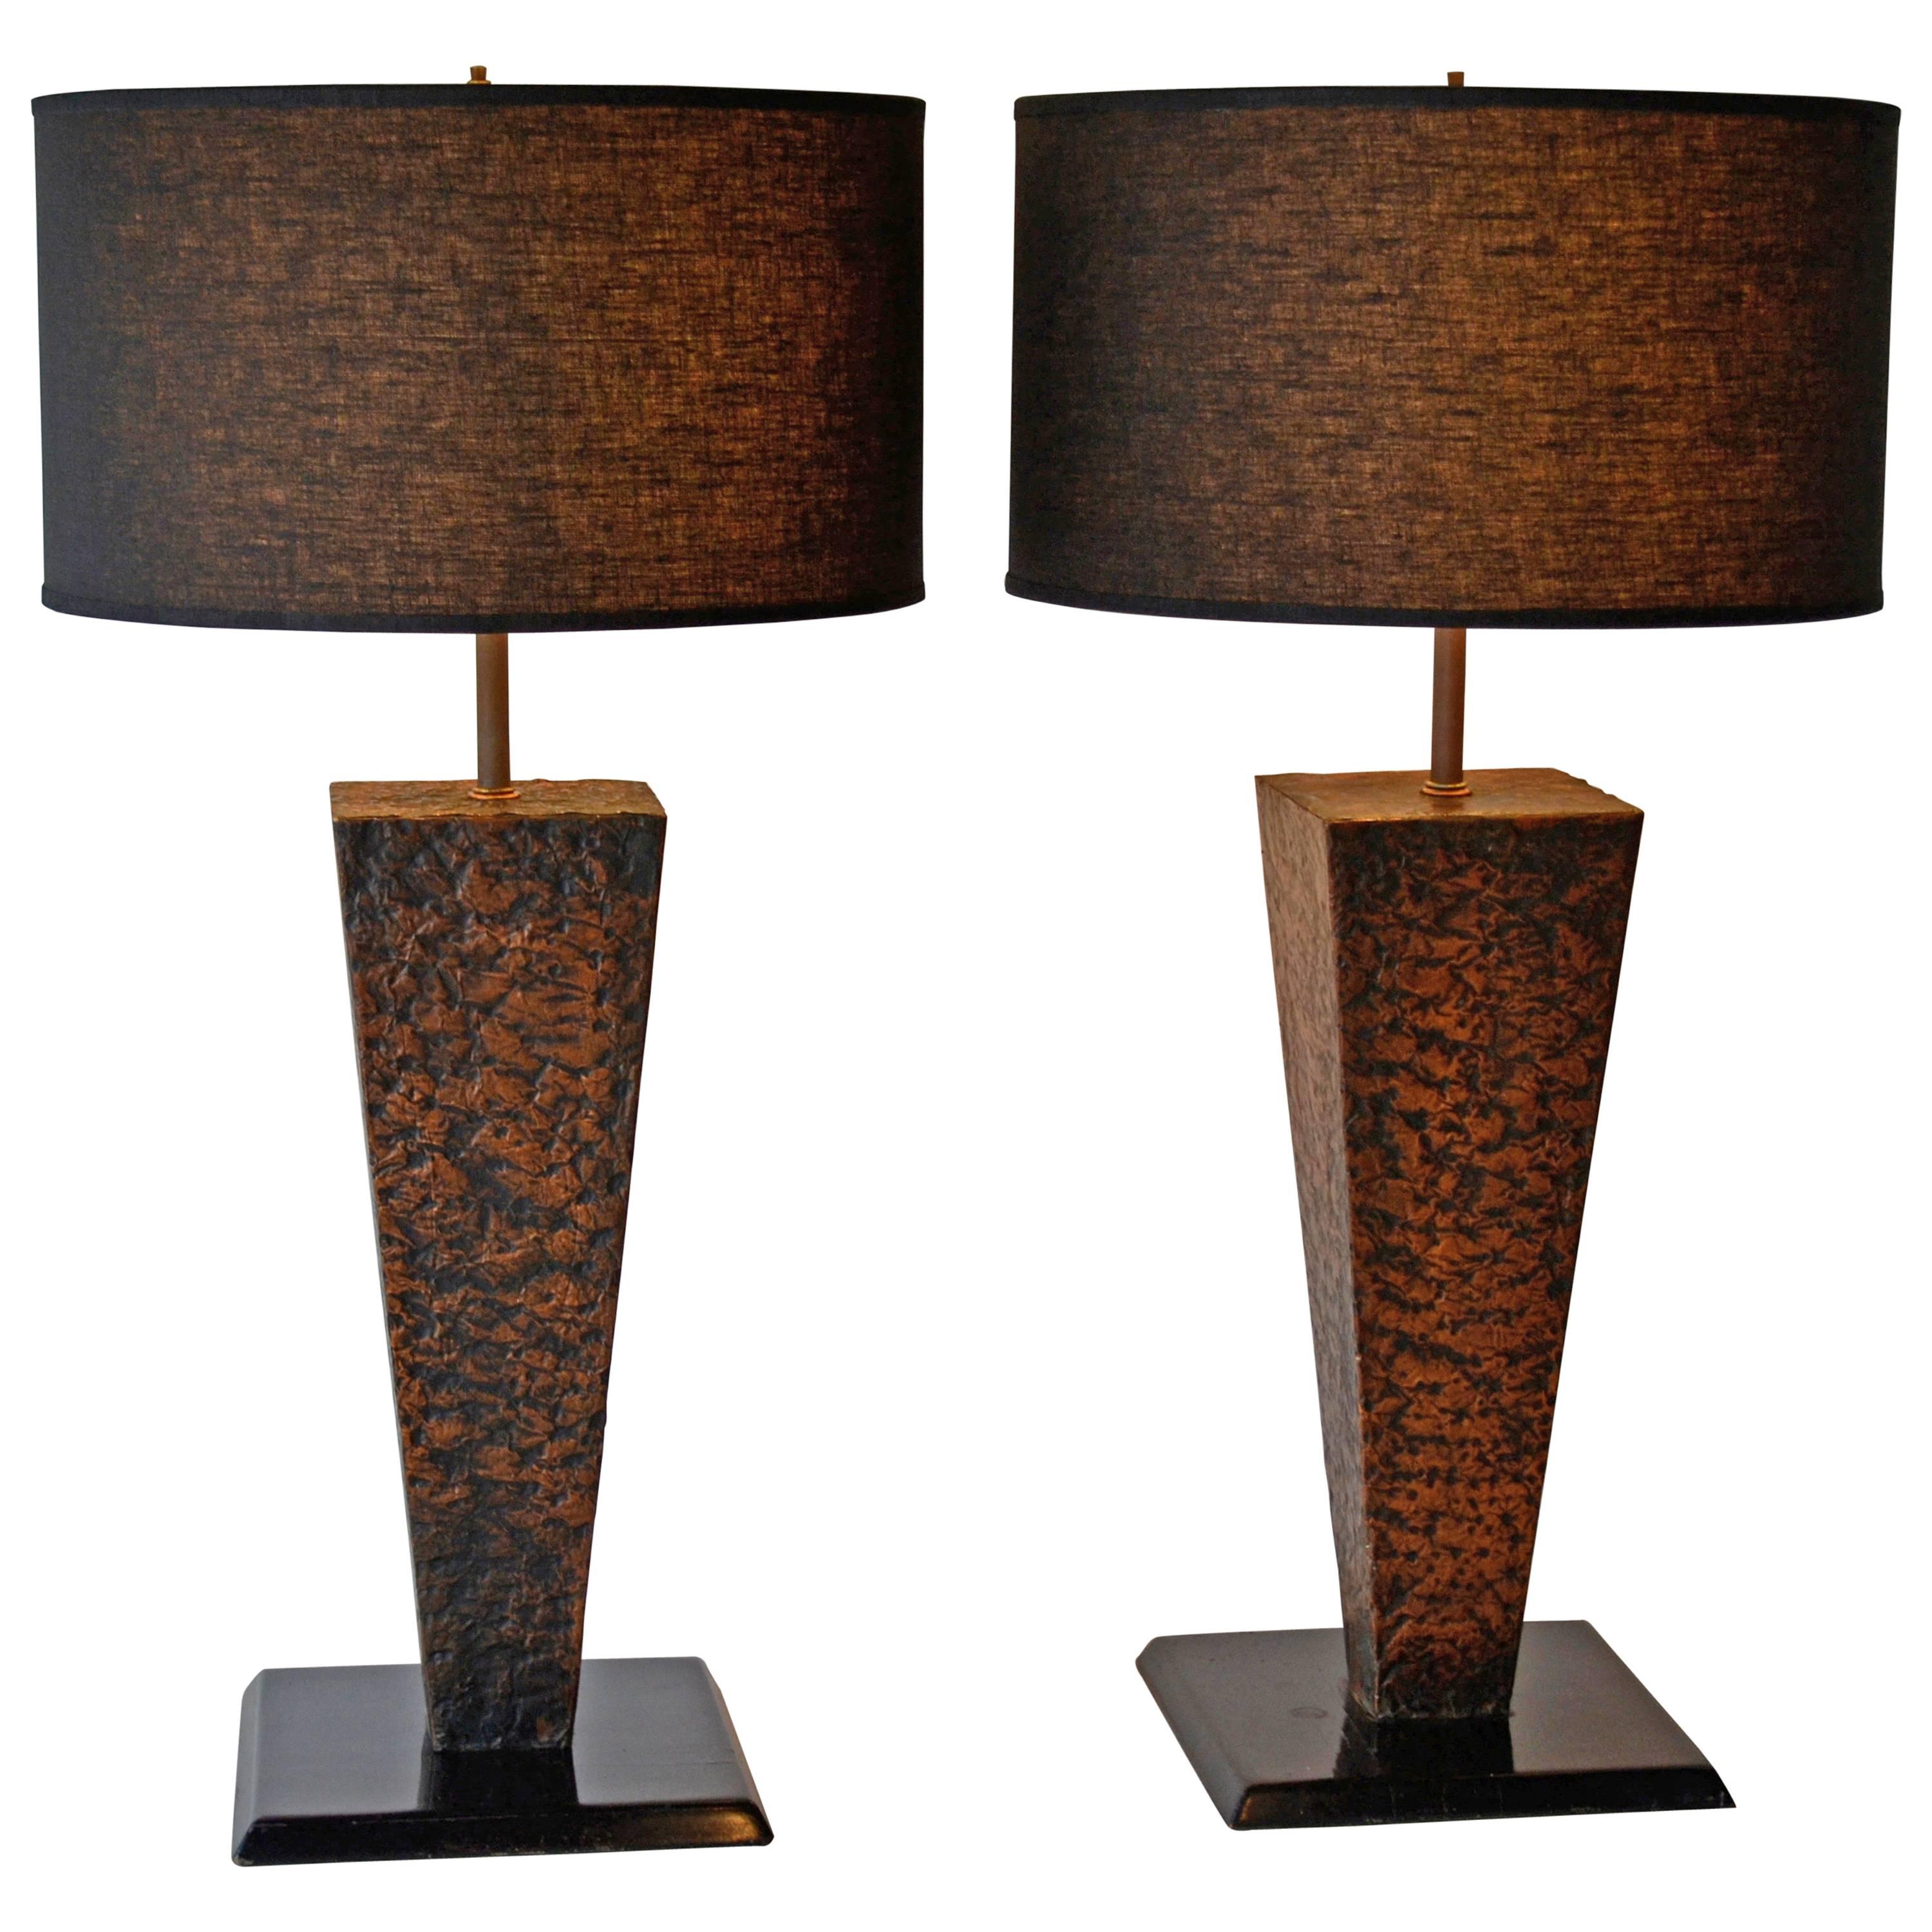 Pair of Hammered Copper Table Lamps Folk Art Handcrafted, 1950's For Sale